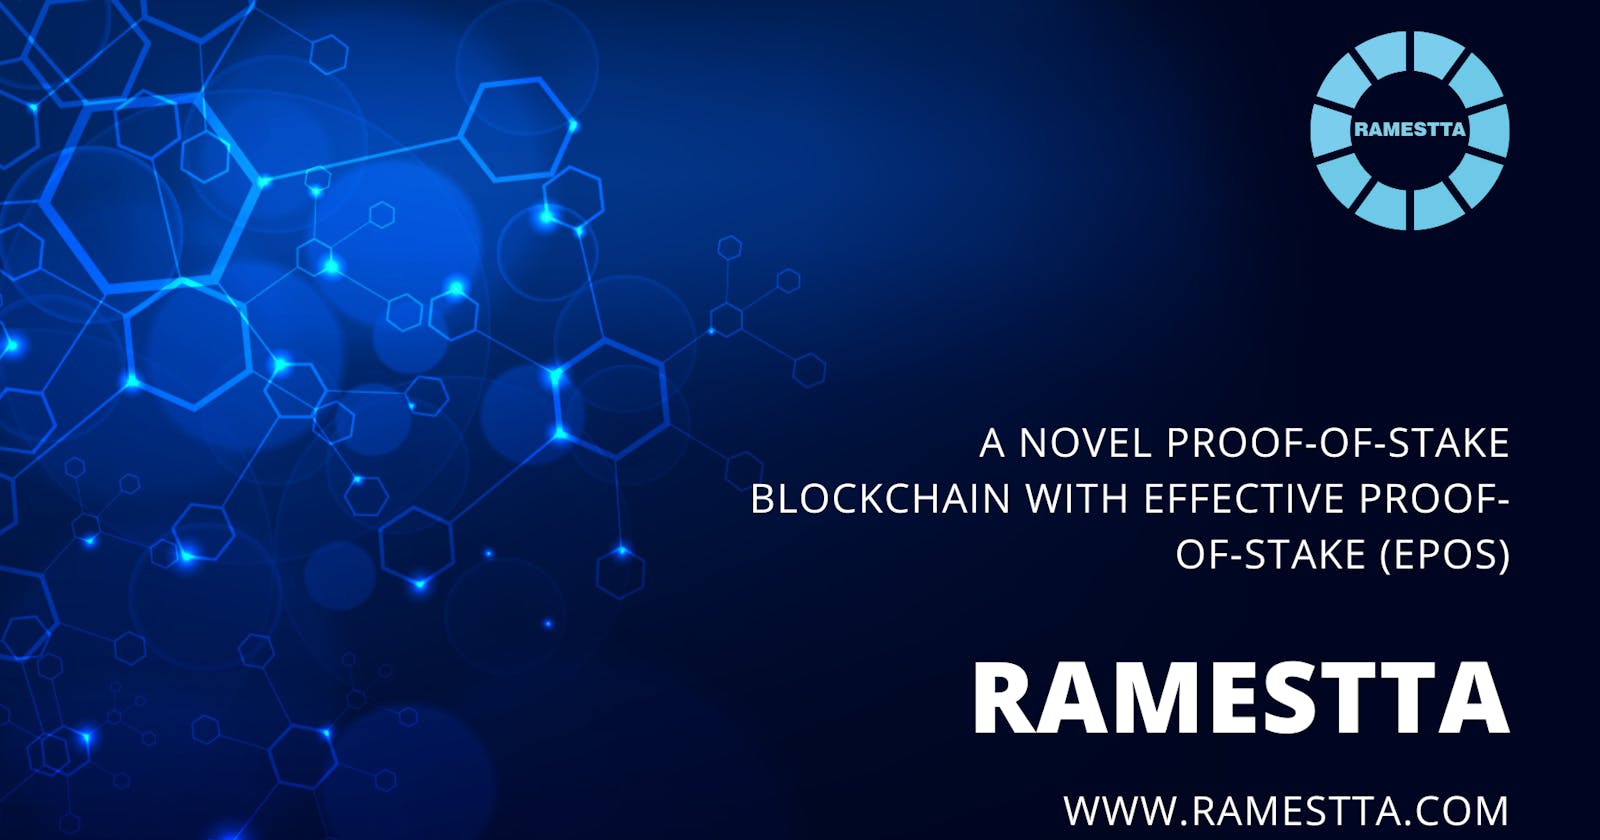 Ramestta : A Novel Proof-of-Stake Blockchain with Effective Proof-of-Stake (EPoS)